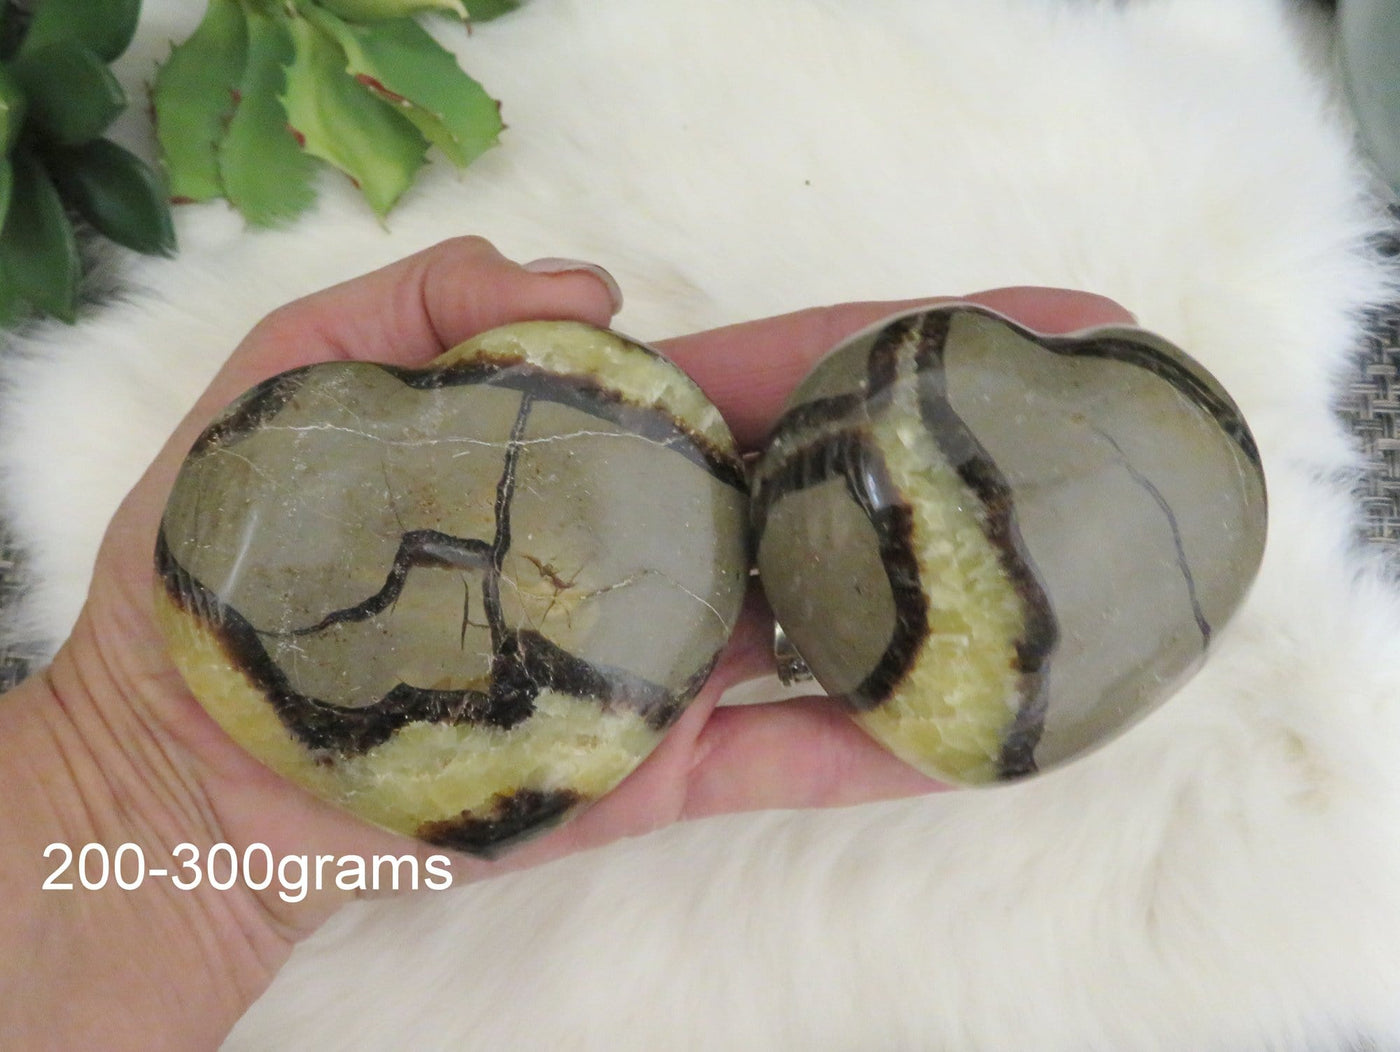 two 200-300g septarian polished heart stones in hand for approximate size reference